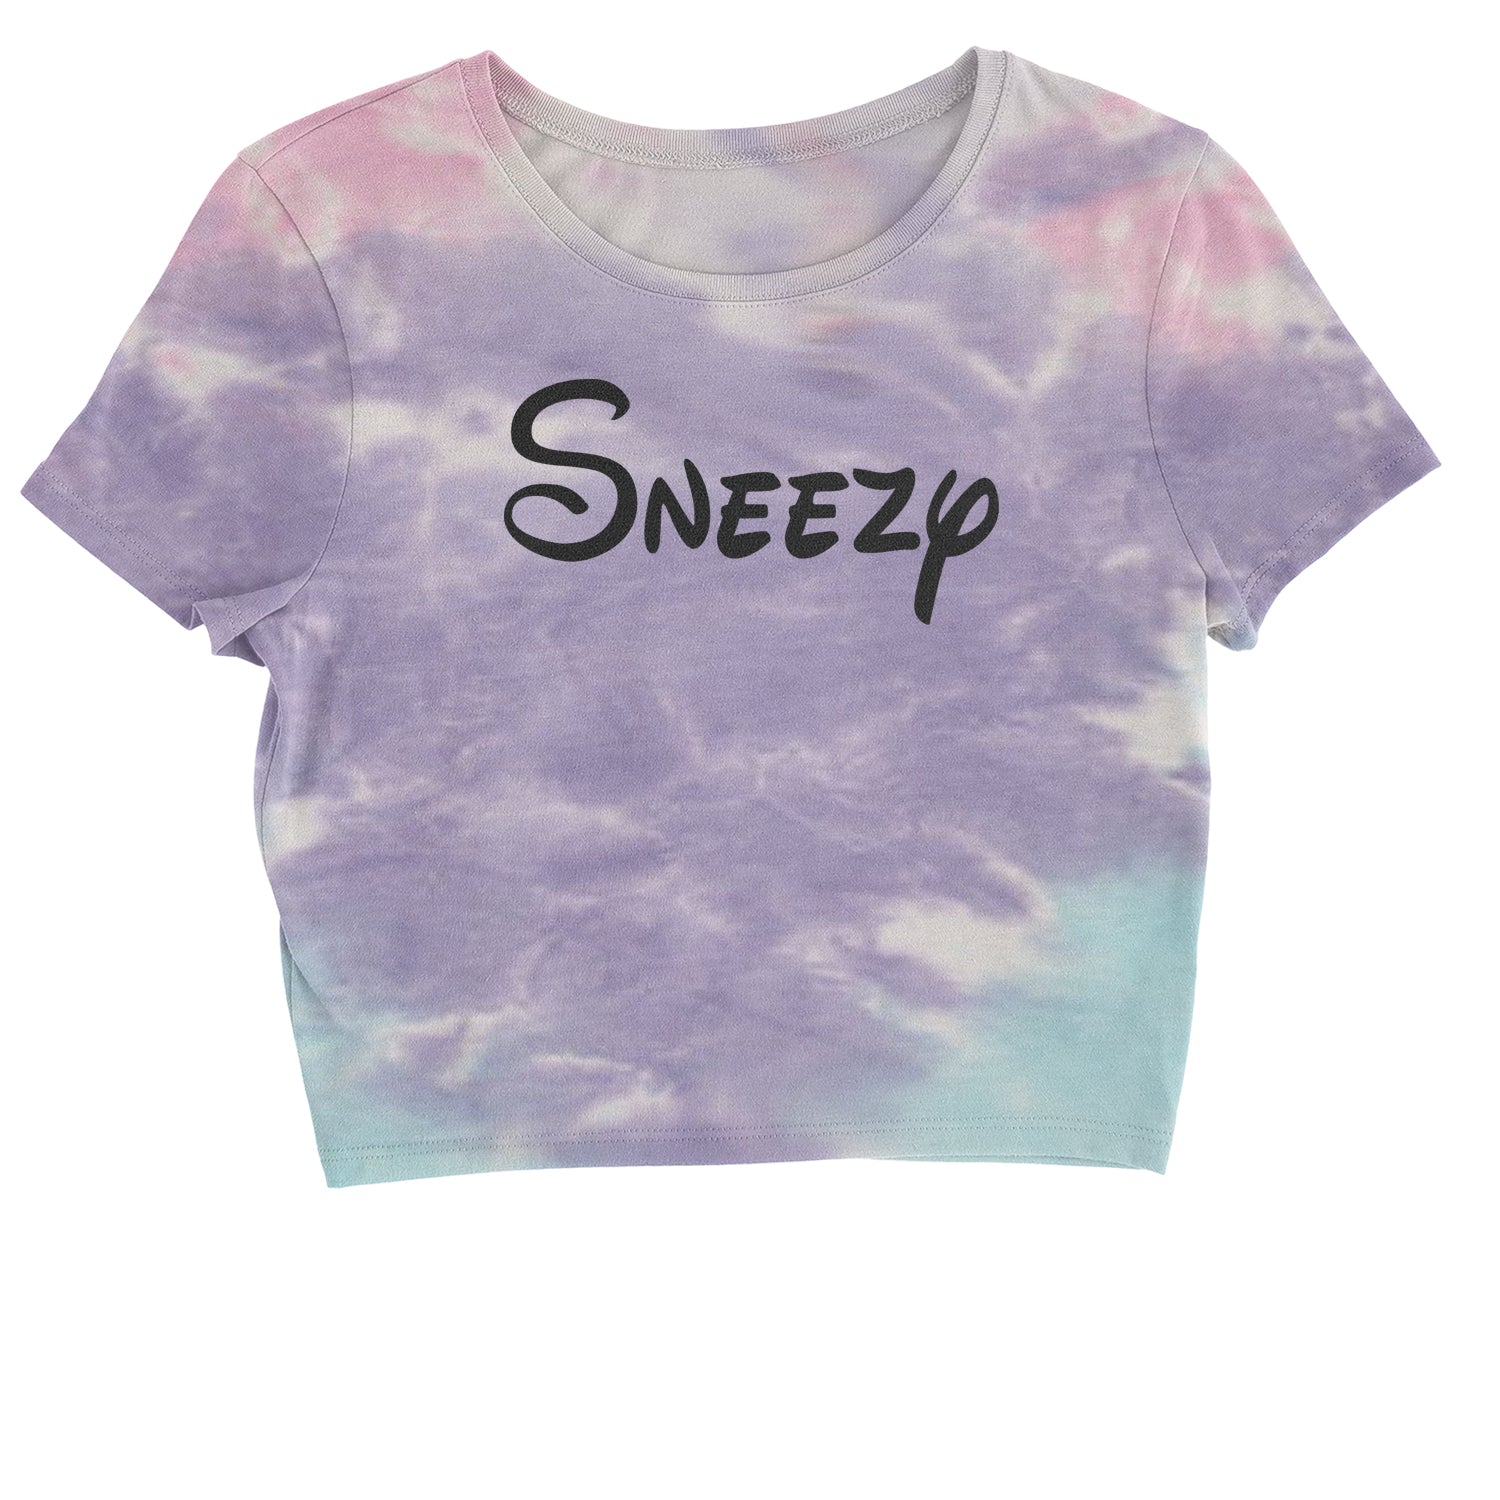 Sneezy - 7 Dwarfs Costume Cropped T-Shirt and, costume, dwarfs, group, halloween, matching, seven, snow, the, white by Expression Tees